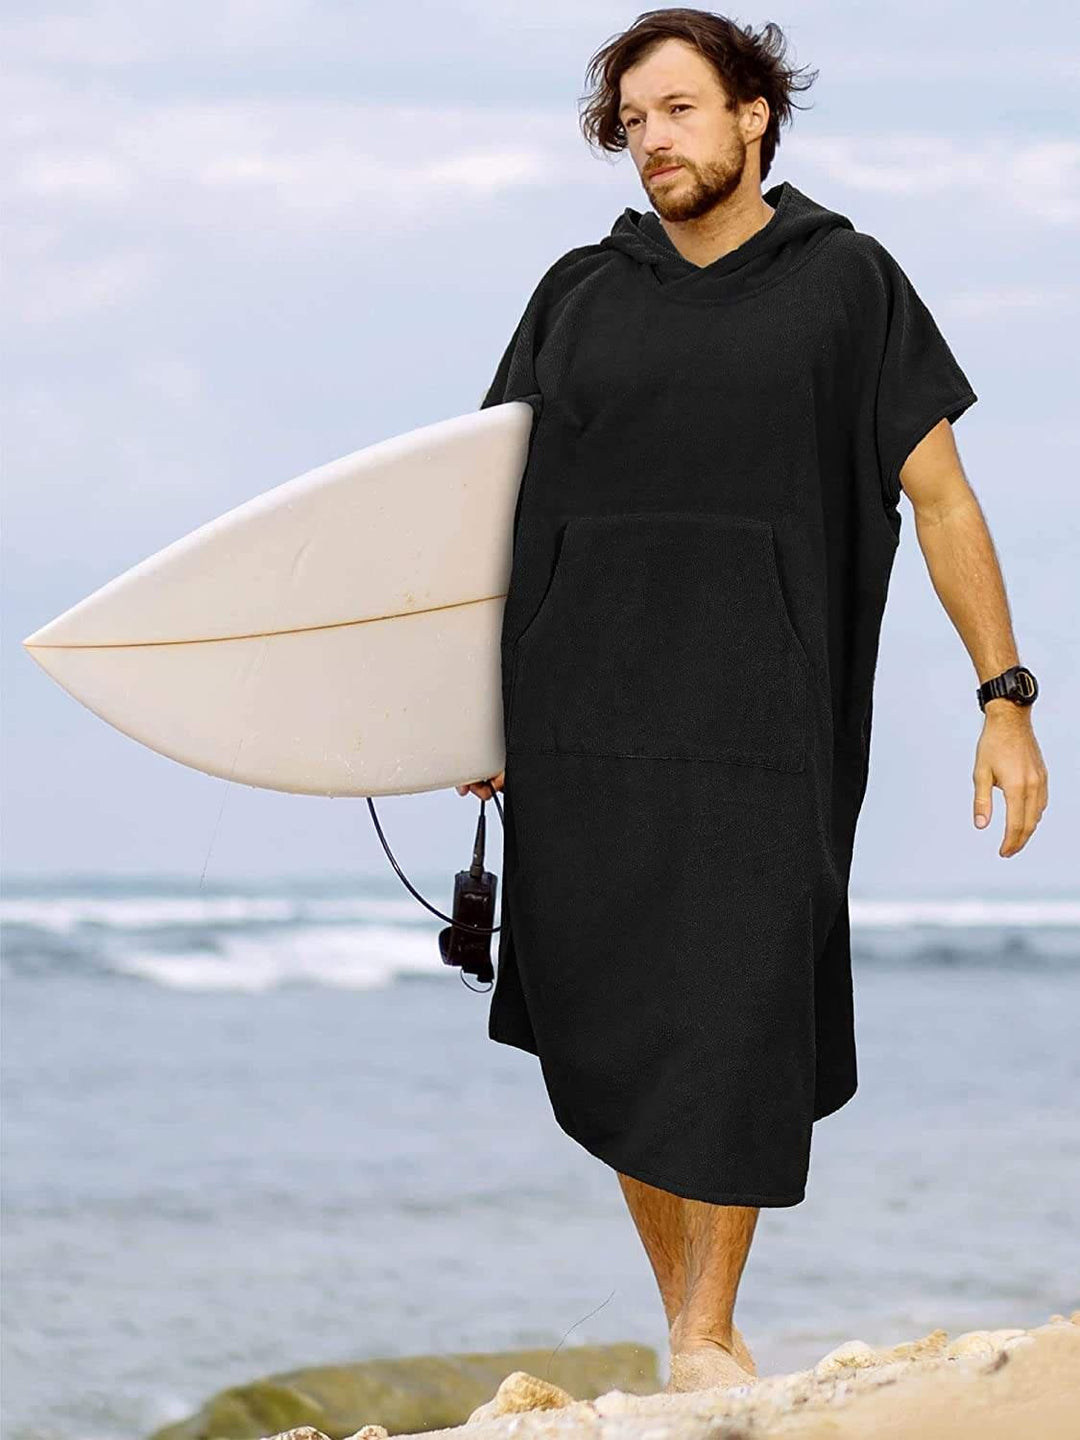 Changing Robe with Hood Quick Dry Microfiber Wetsuit Changing Towel with Pocket for Surfing Men Women